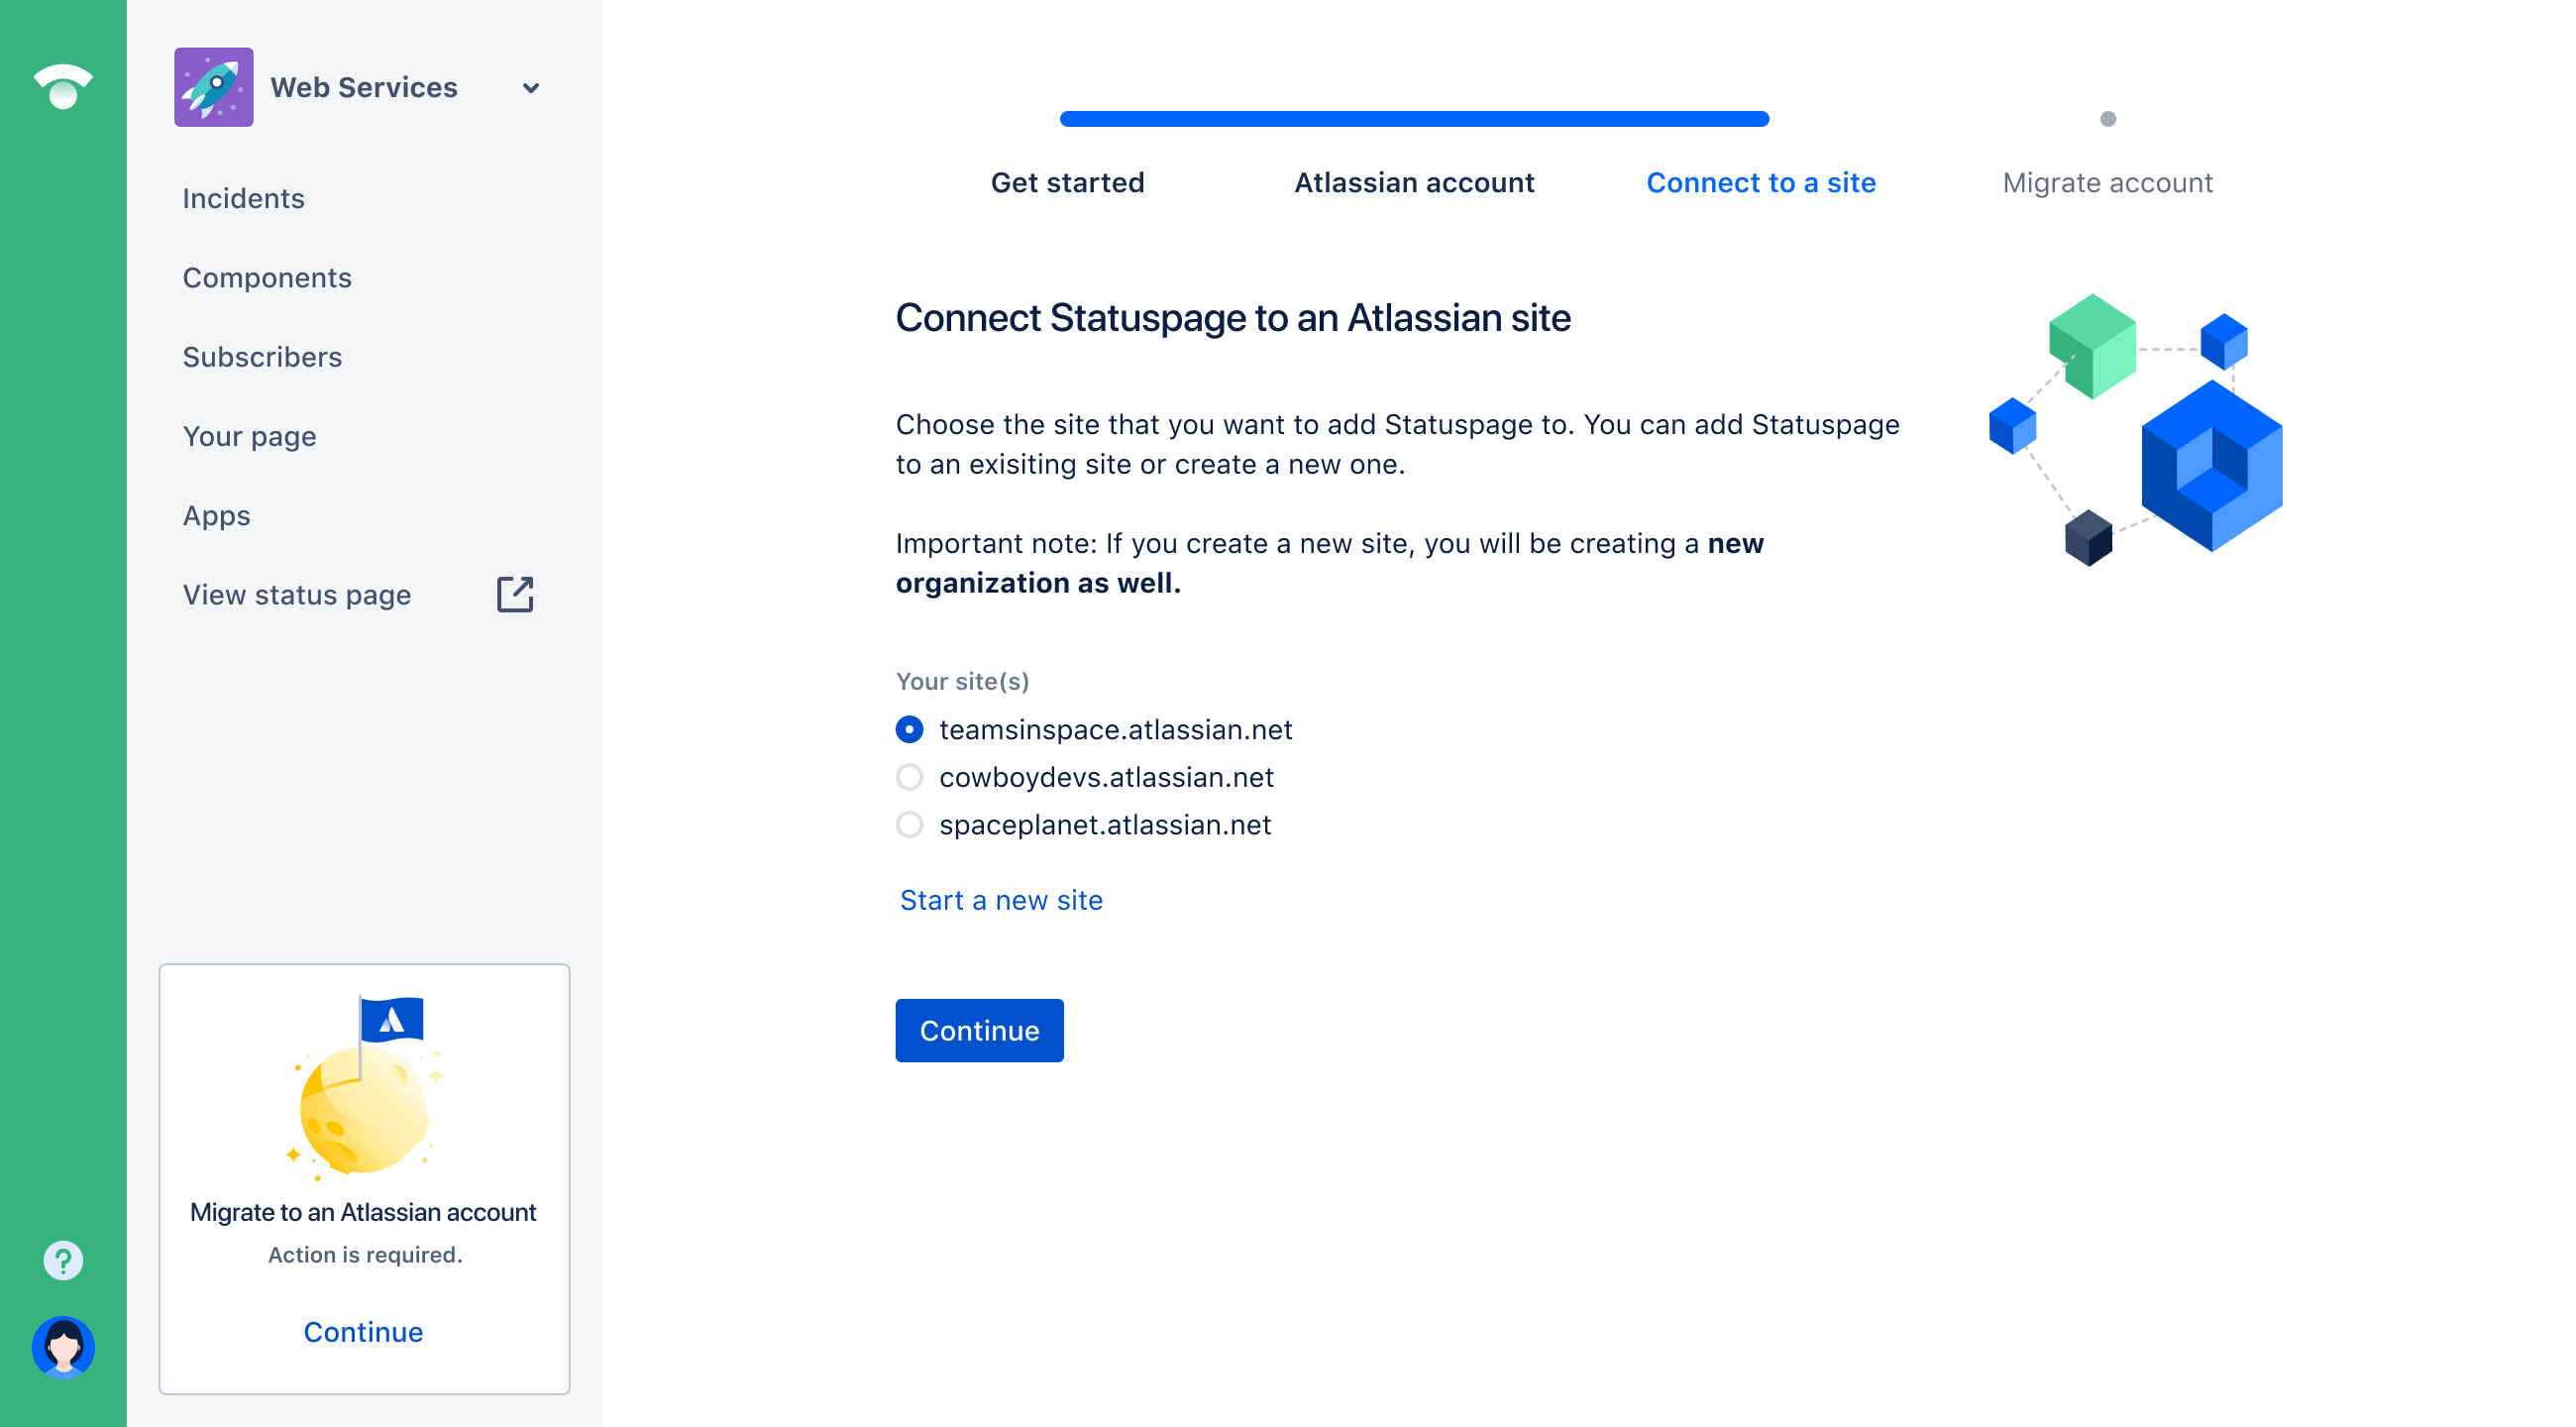 Shows step 3 of the migration guide to connect Statuspage to an Atlassian site